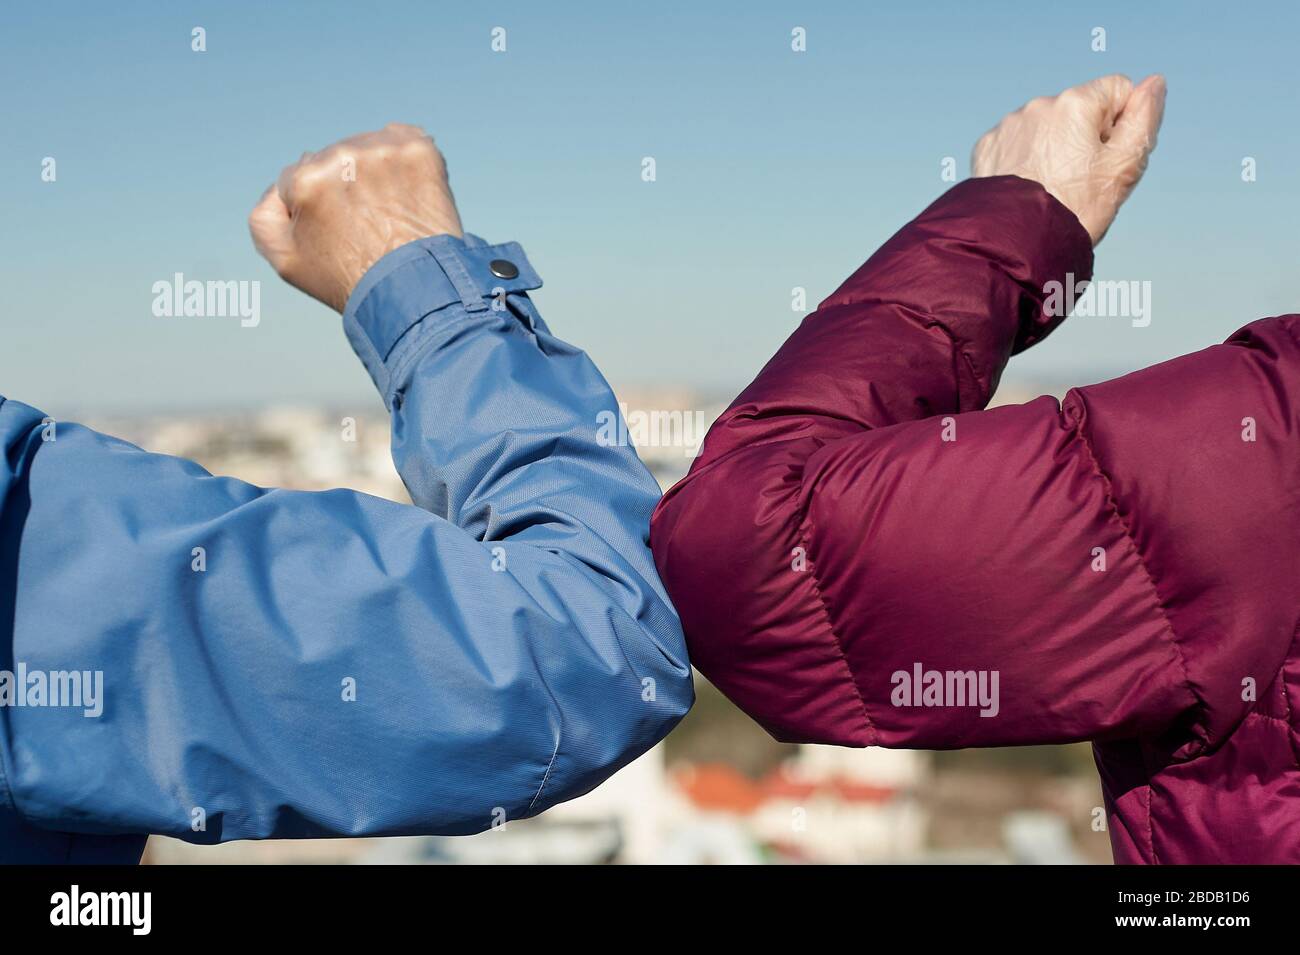 Elbow bump. Greeting with no hand touching. Elbow greeting in quarantine concept. Stock Photo